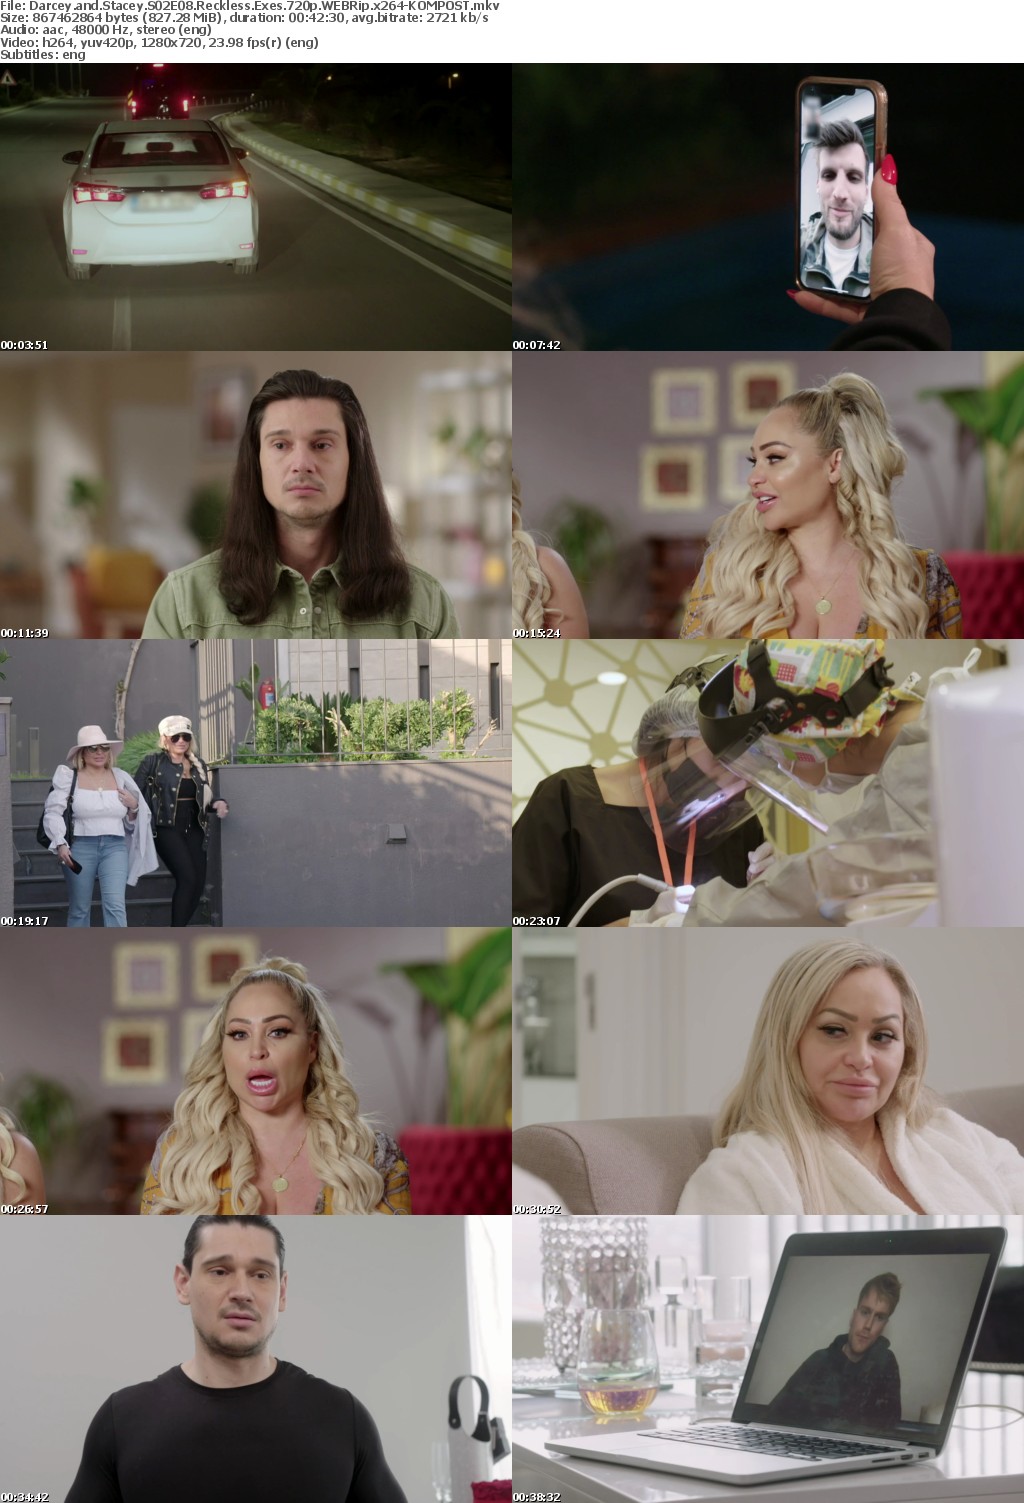 Darcey and Stacey S02E08 Reckless Exes 720p WEBRip x264-KOMPOST